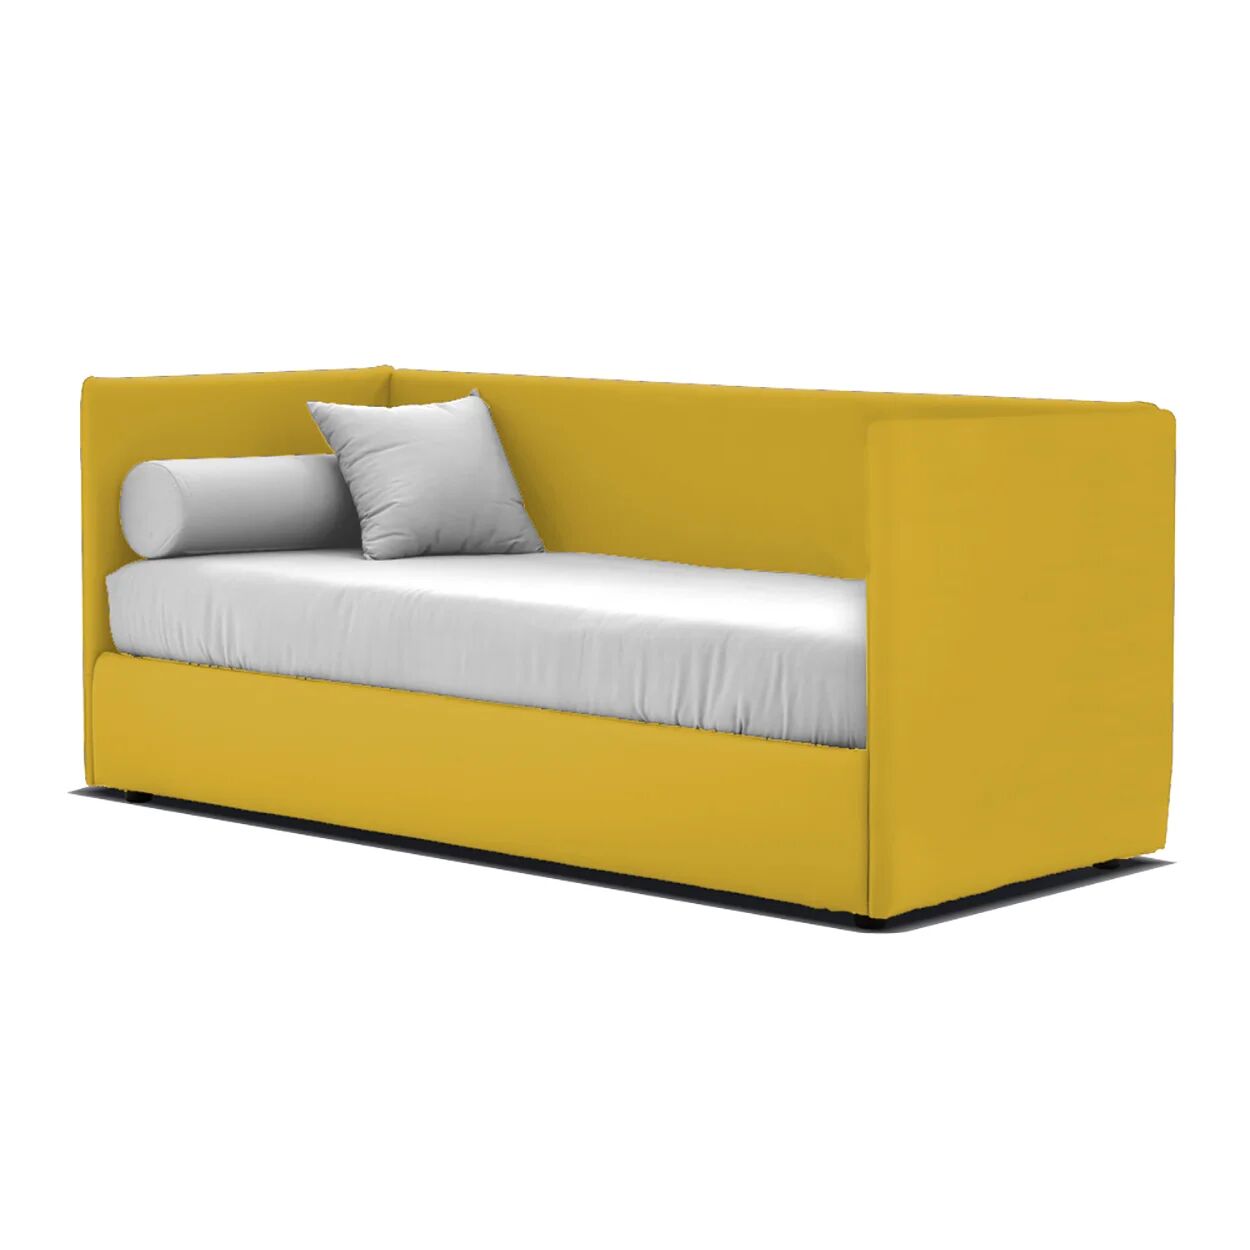 Let it Bed WHY-D-LINEAR - Letto versione box, giallo